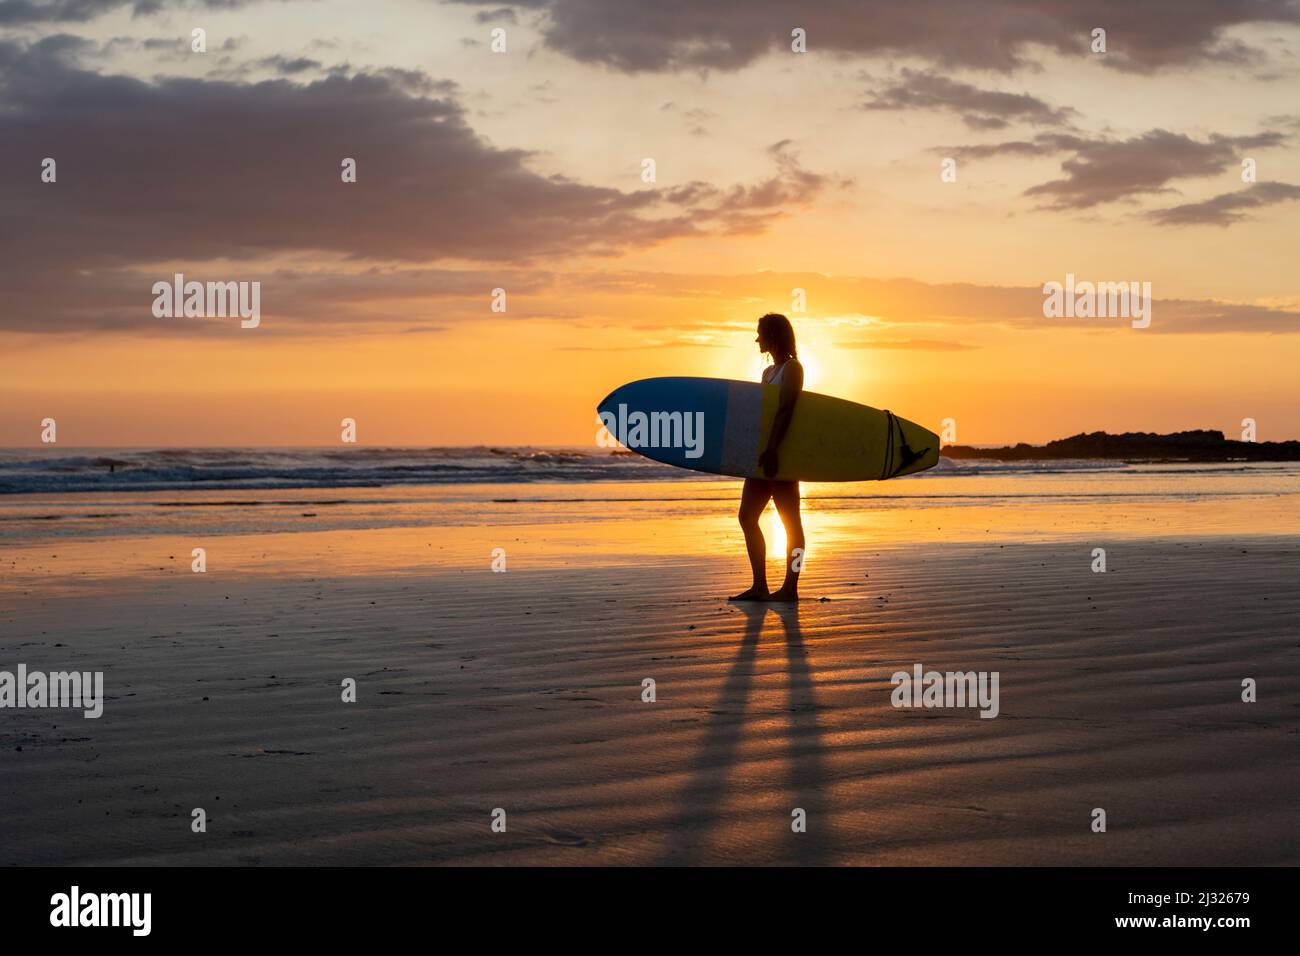 Surfer girl silhouette. Surf woman walking with surfboard on the beach. Golden hour beautiful colors Stock Photo